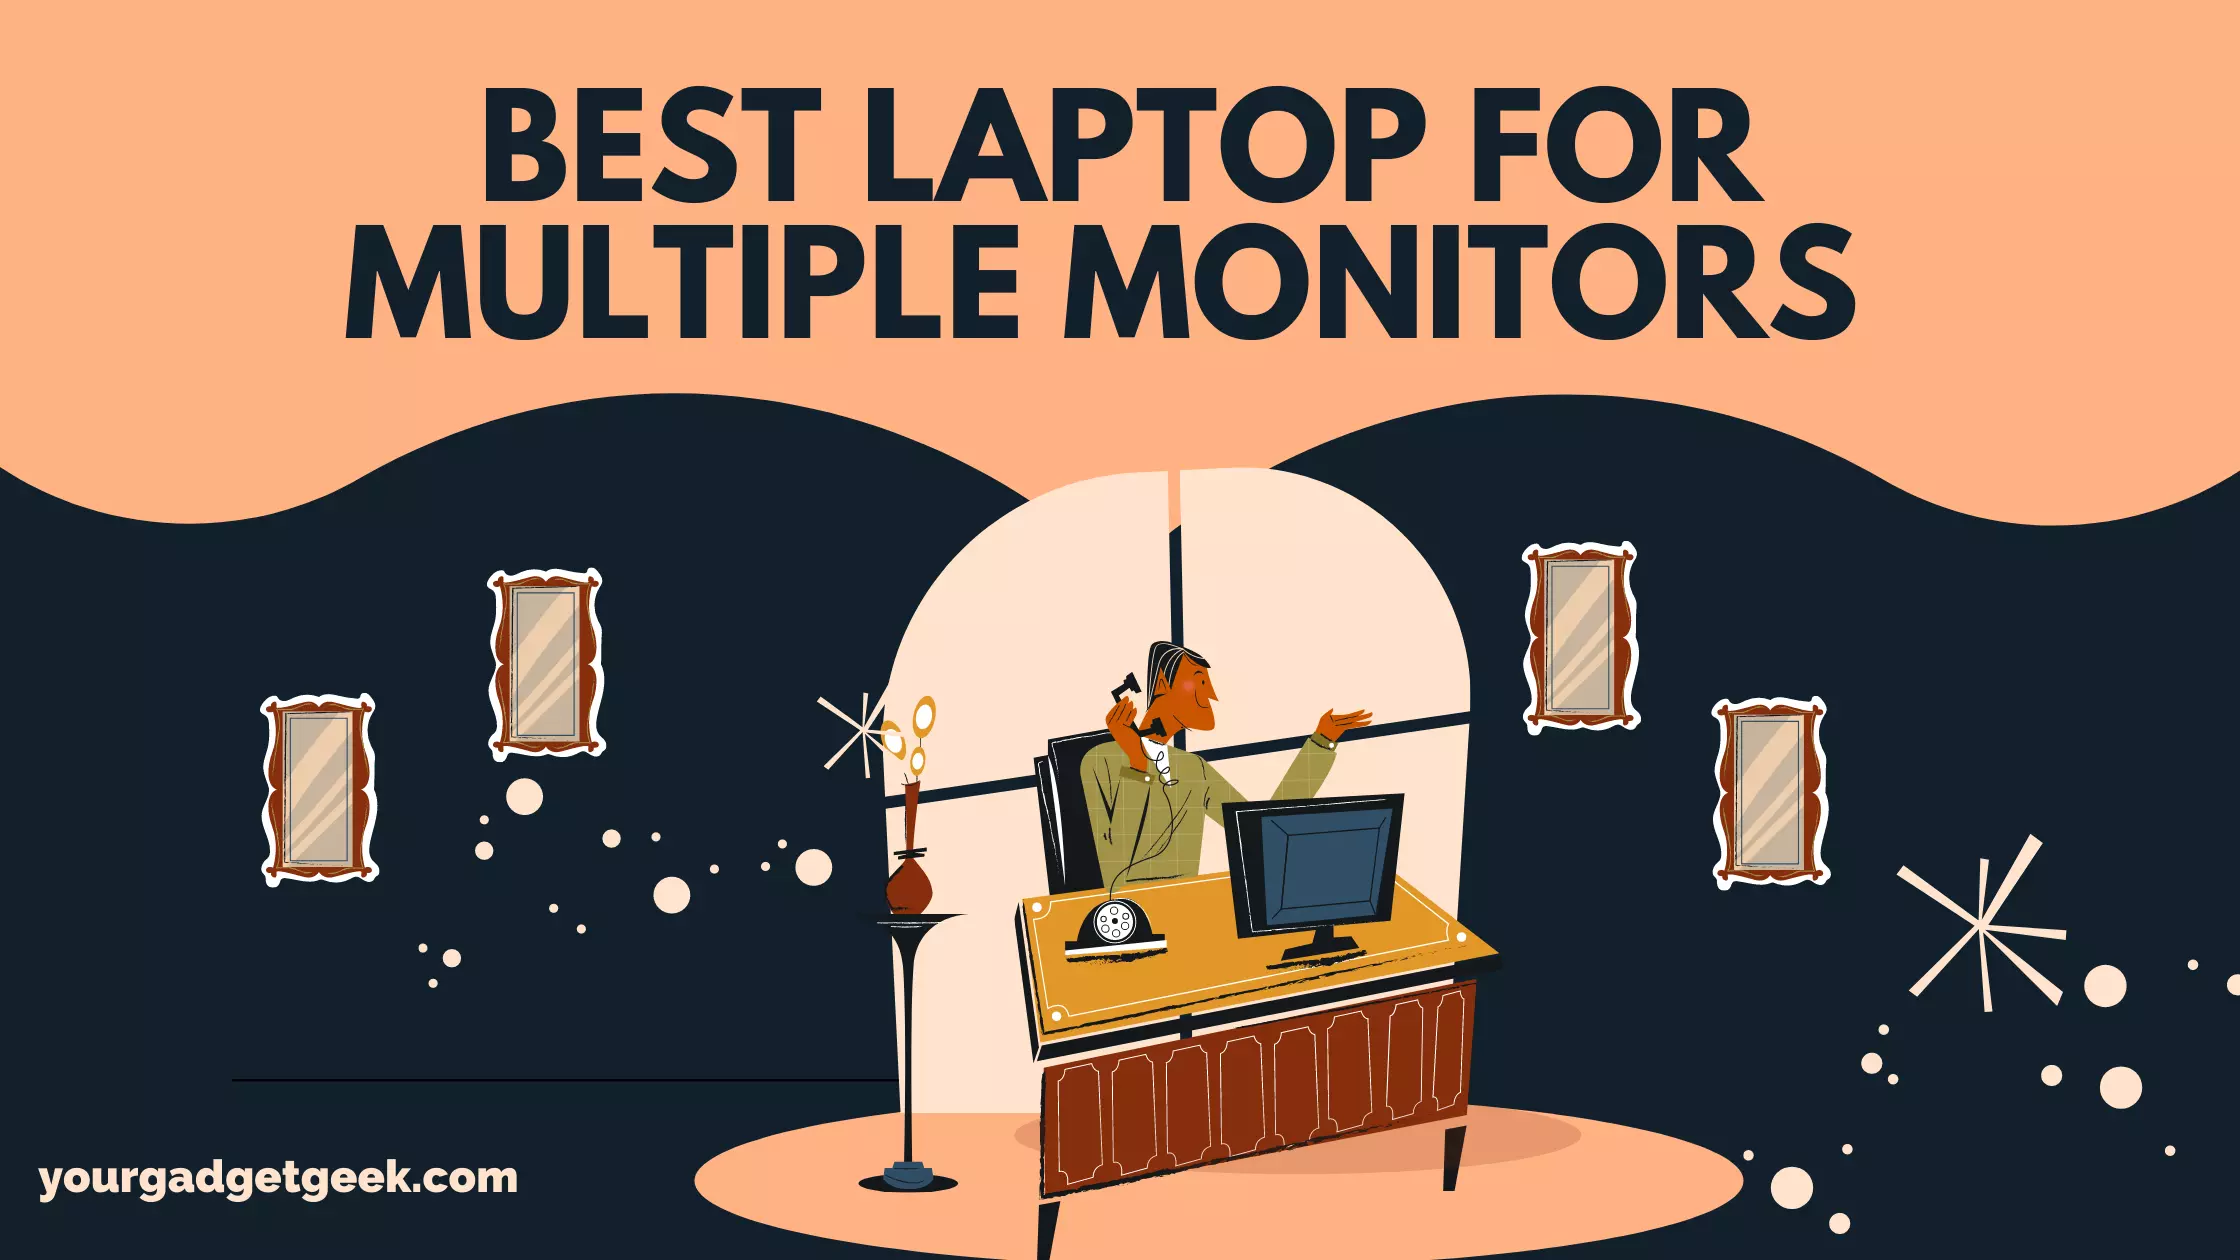 Best Laptop For Multiple Monitors (4) featured image